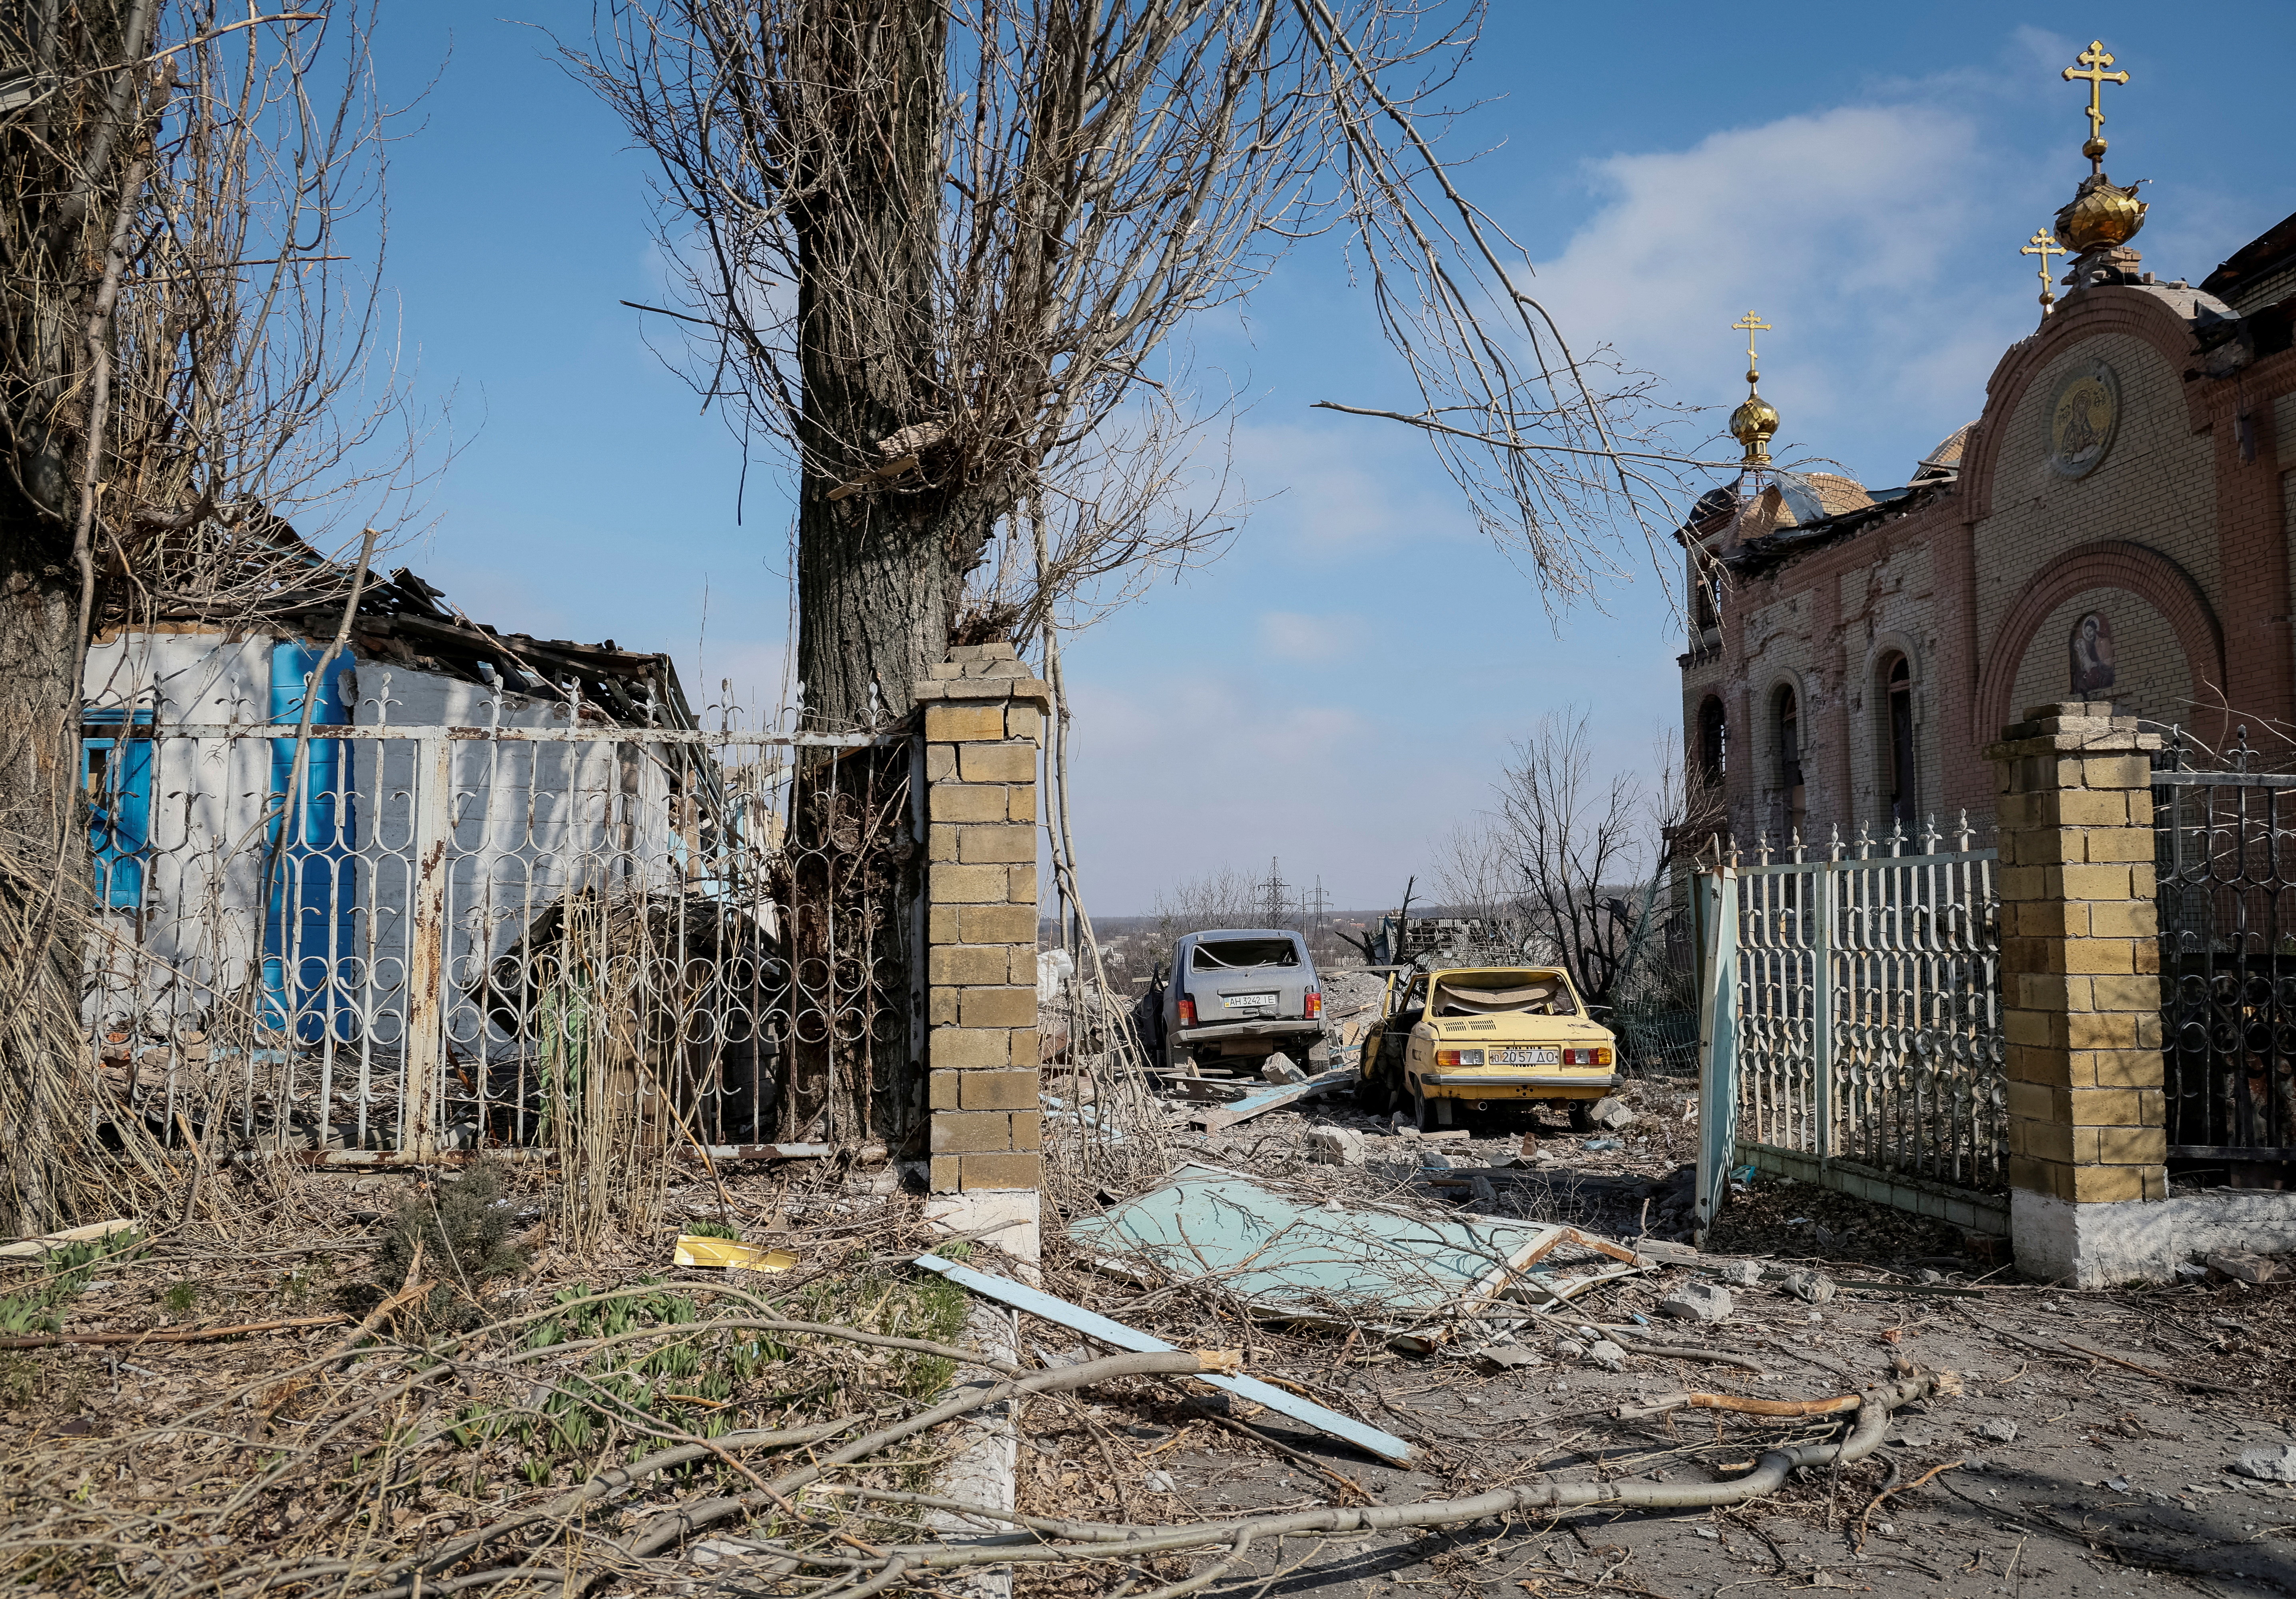 A view shows a residential building, cars and a church damaged by a Russian military strike in the frontline city of Avdiivka